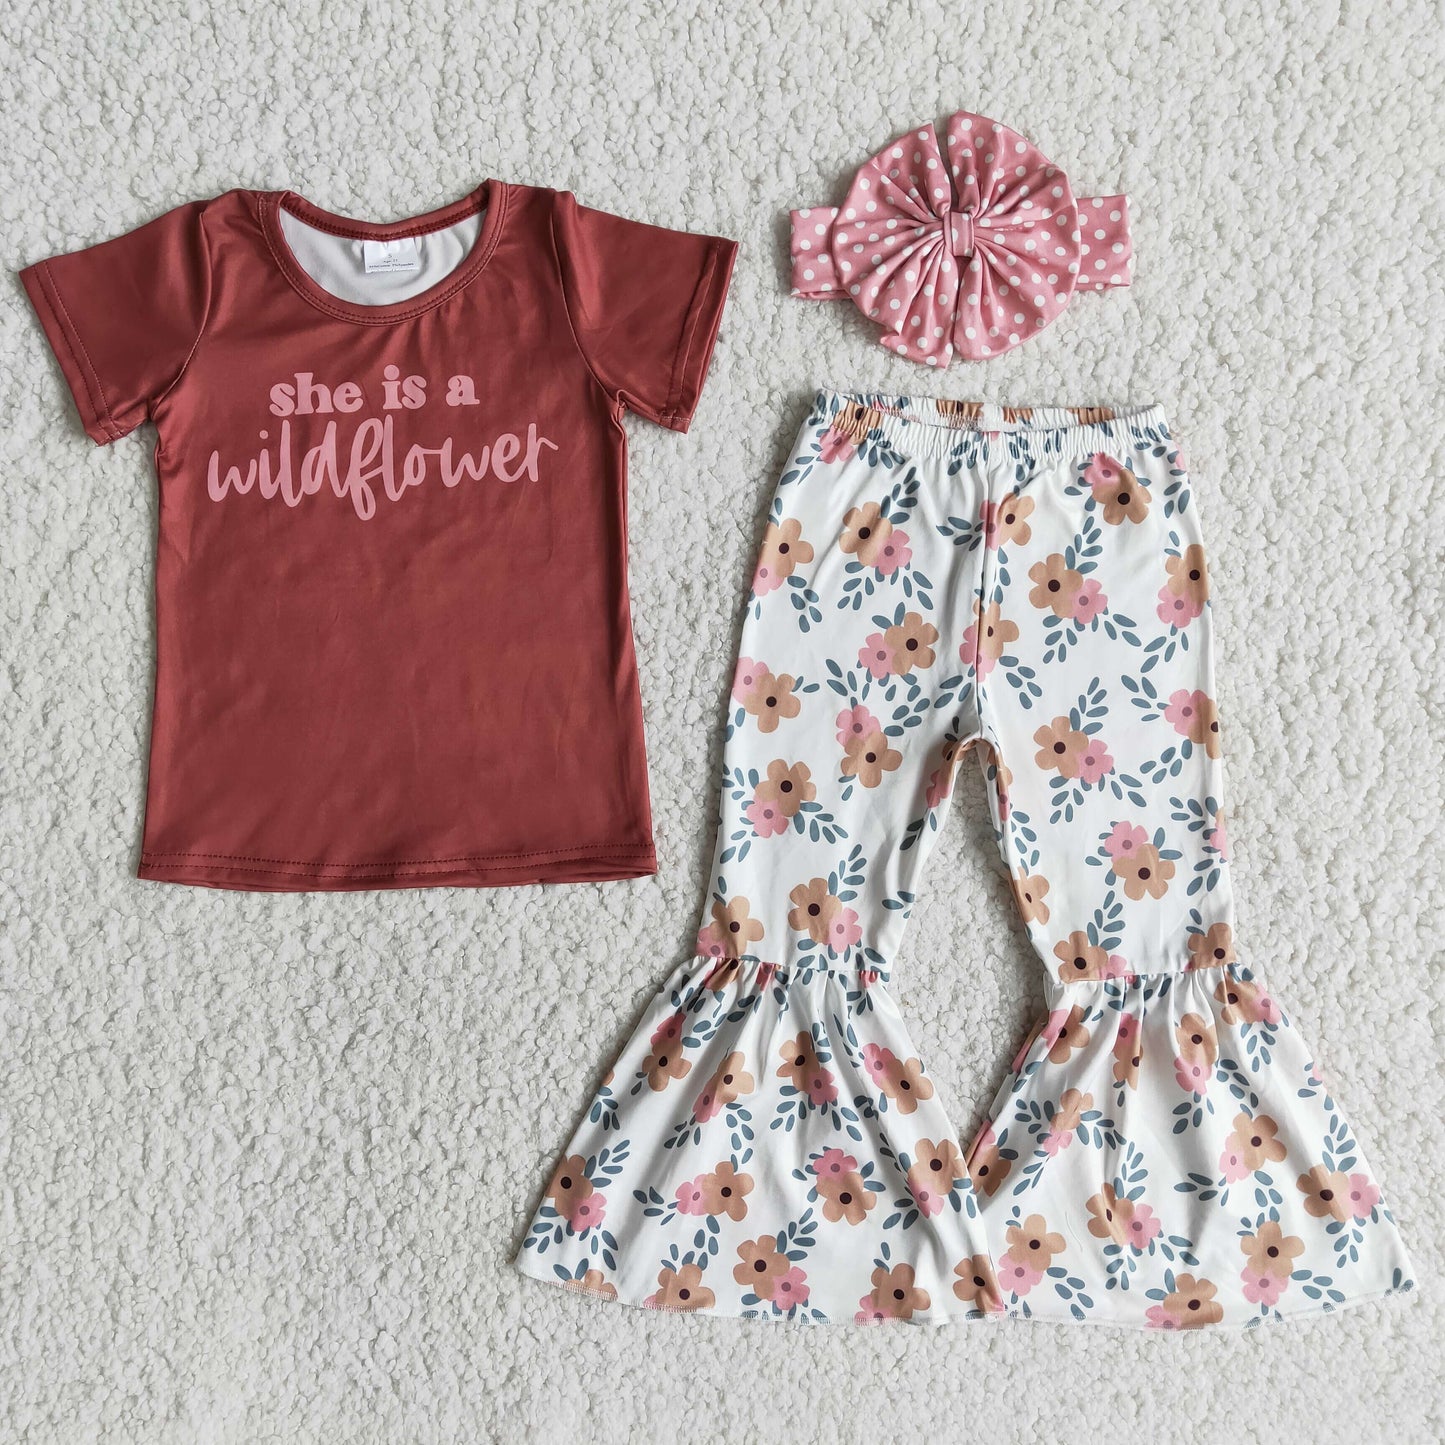 She is a wildflower baby girls summer outfit